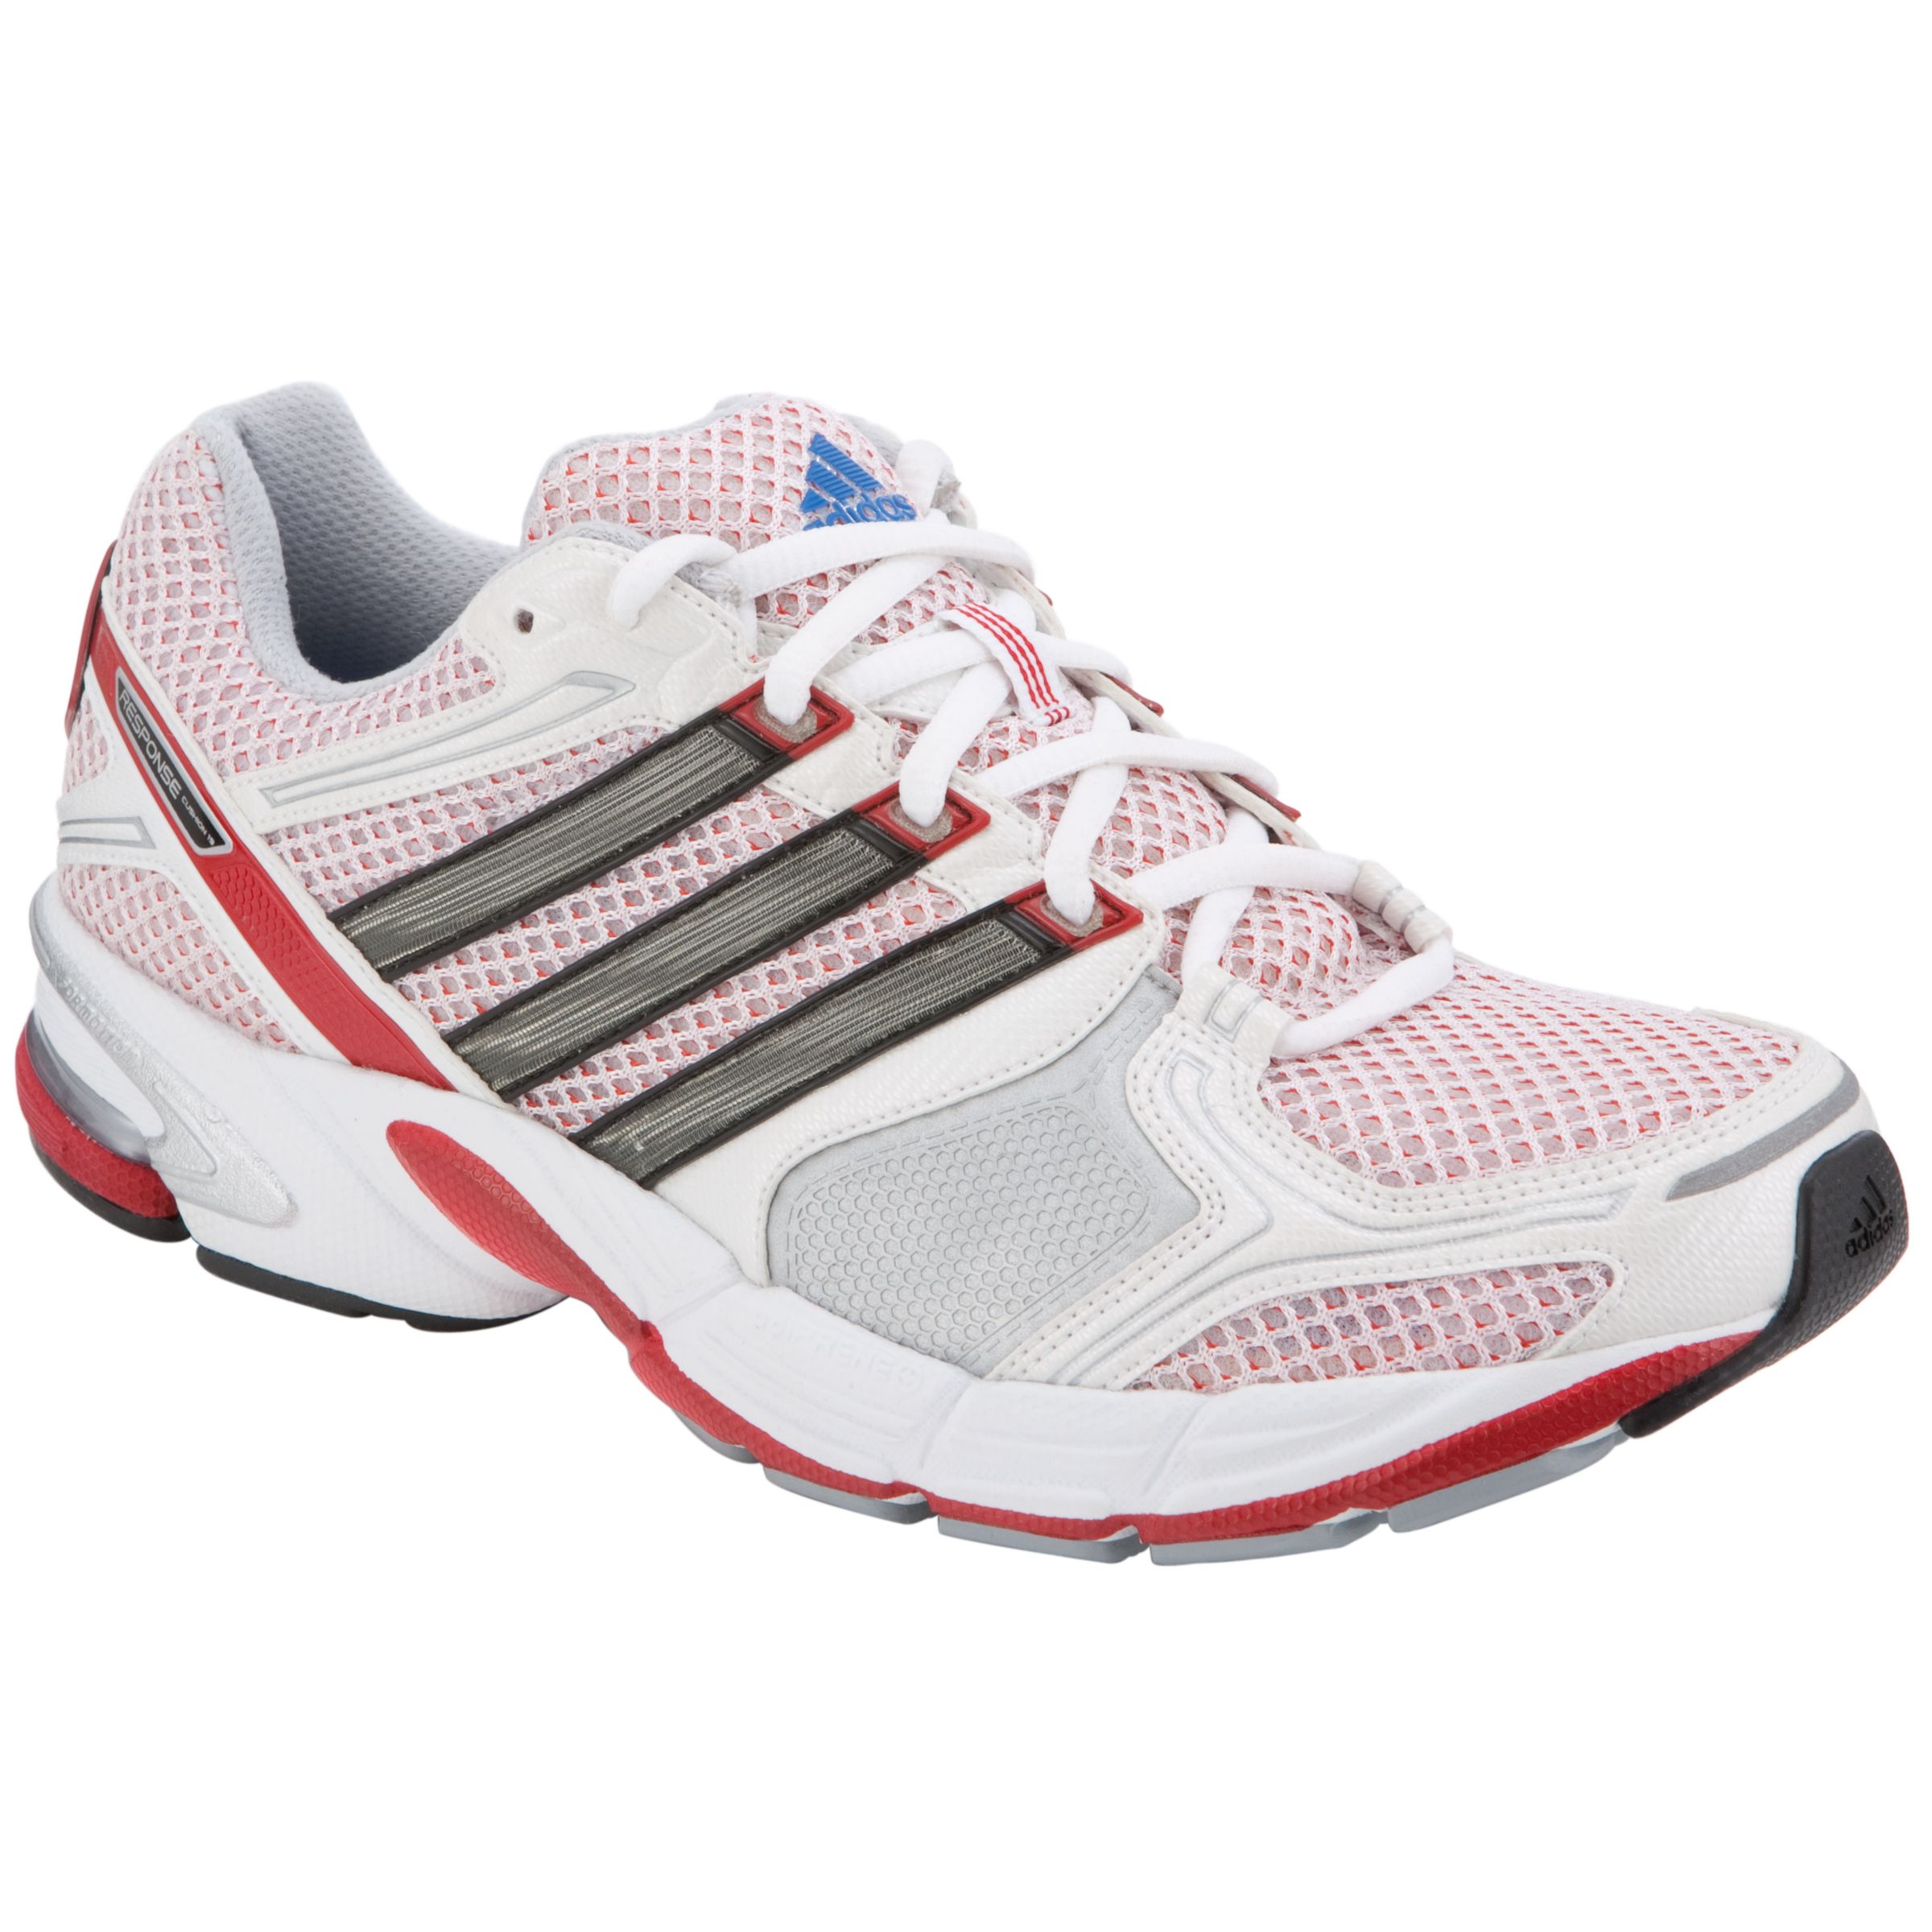 Adidas Response Neutral Running Shoes, White/red